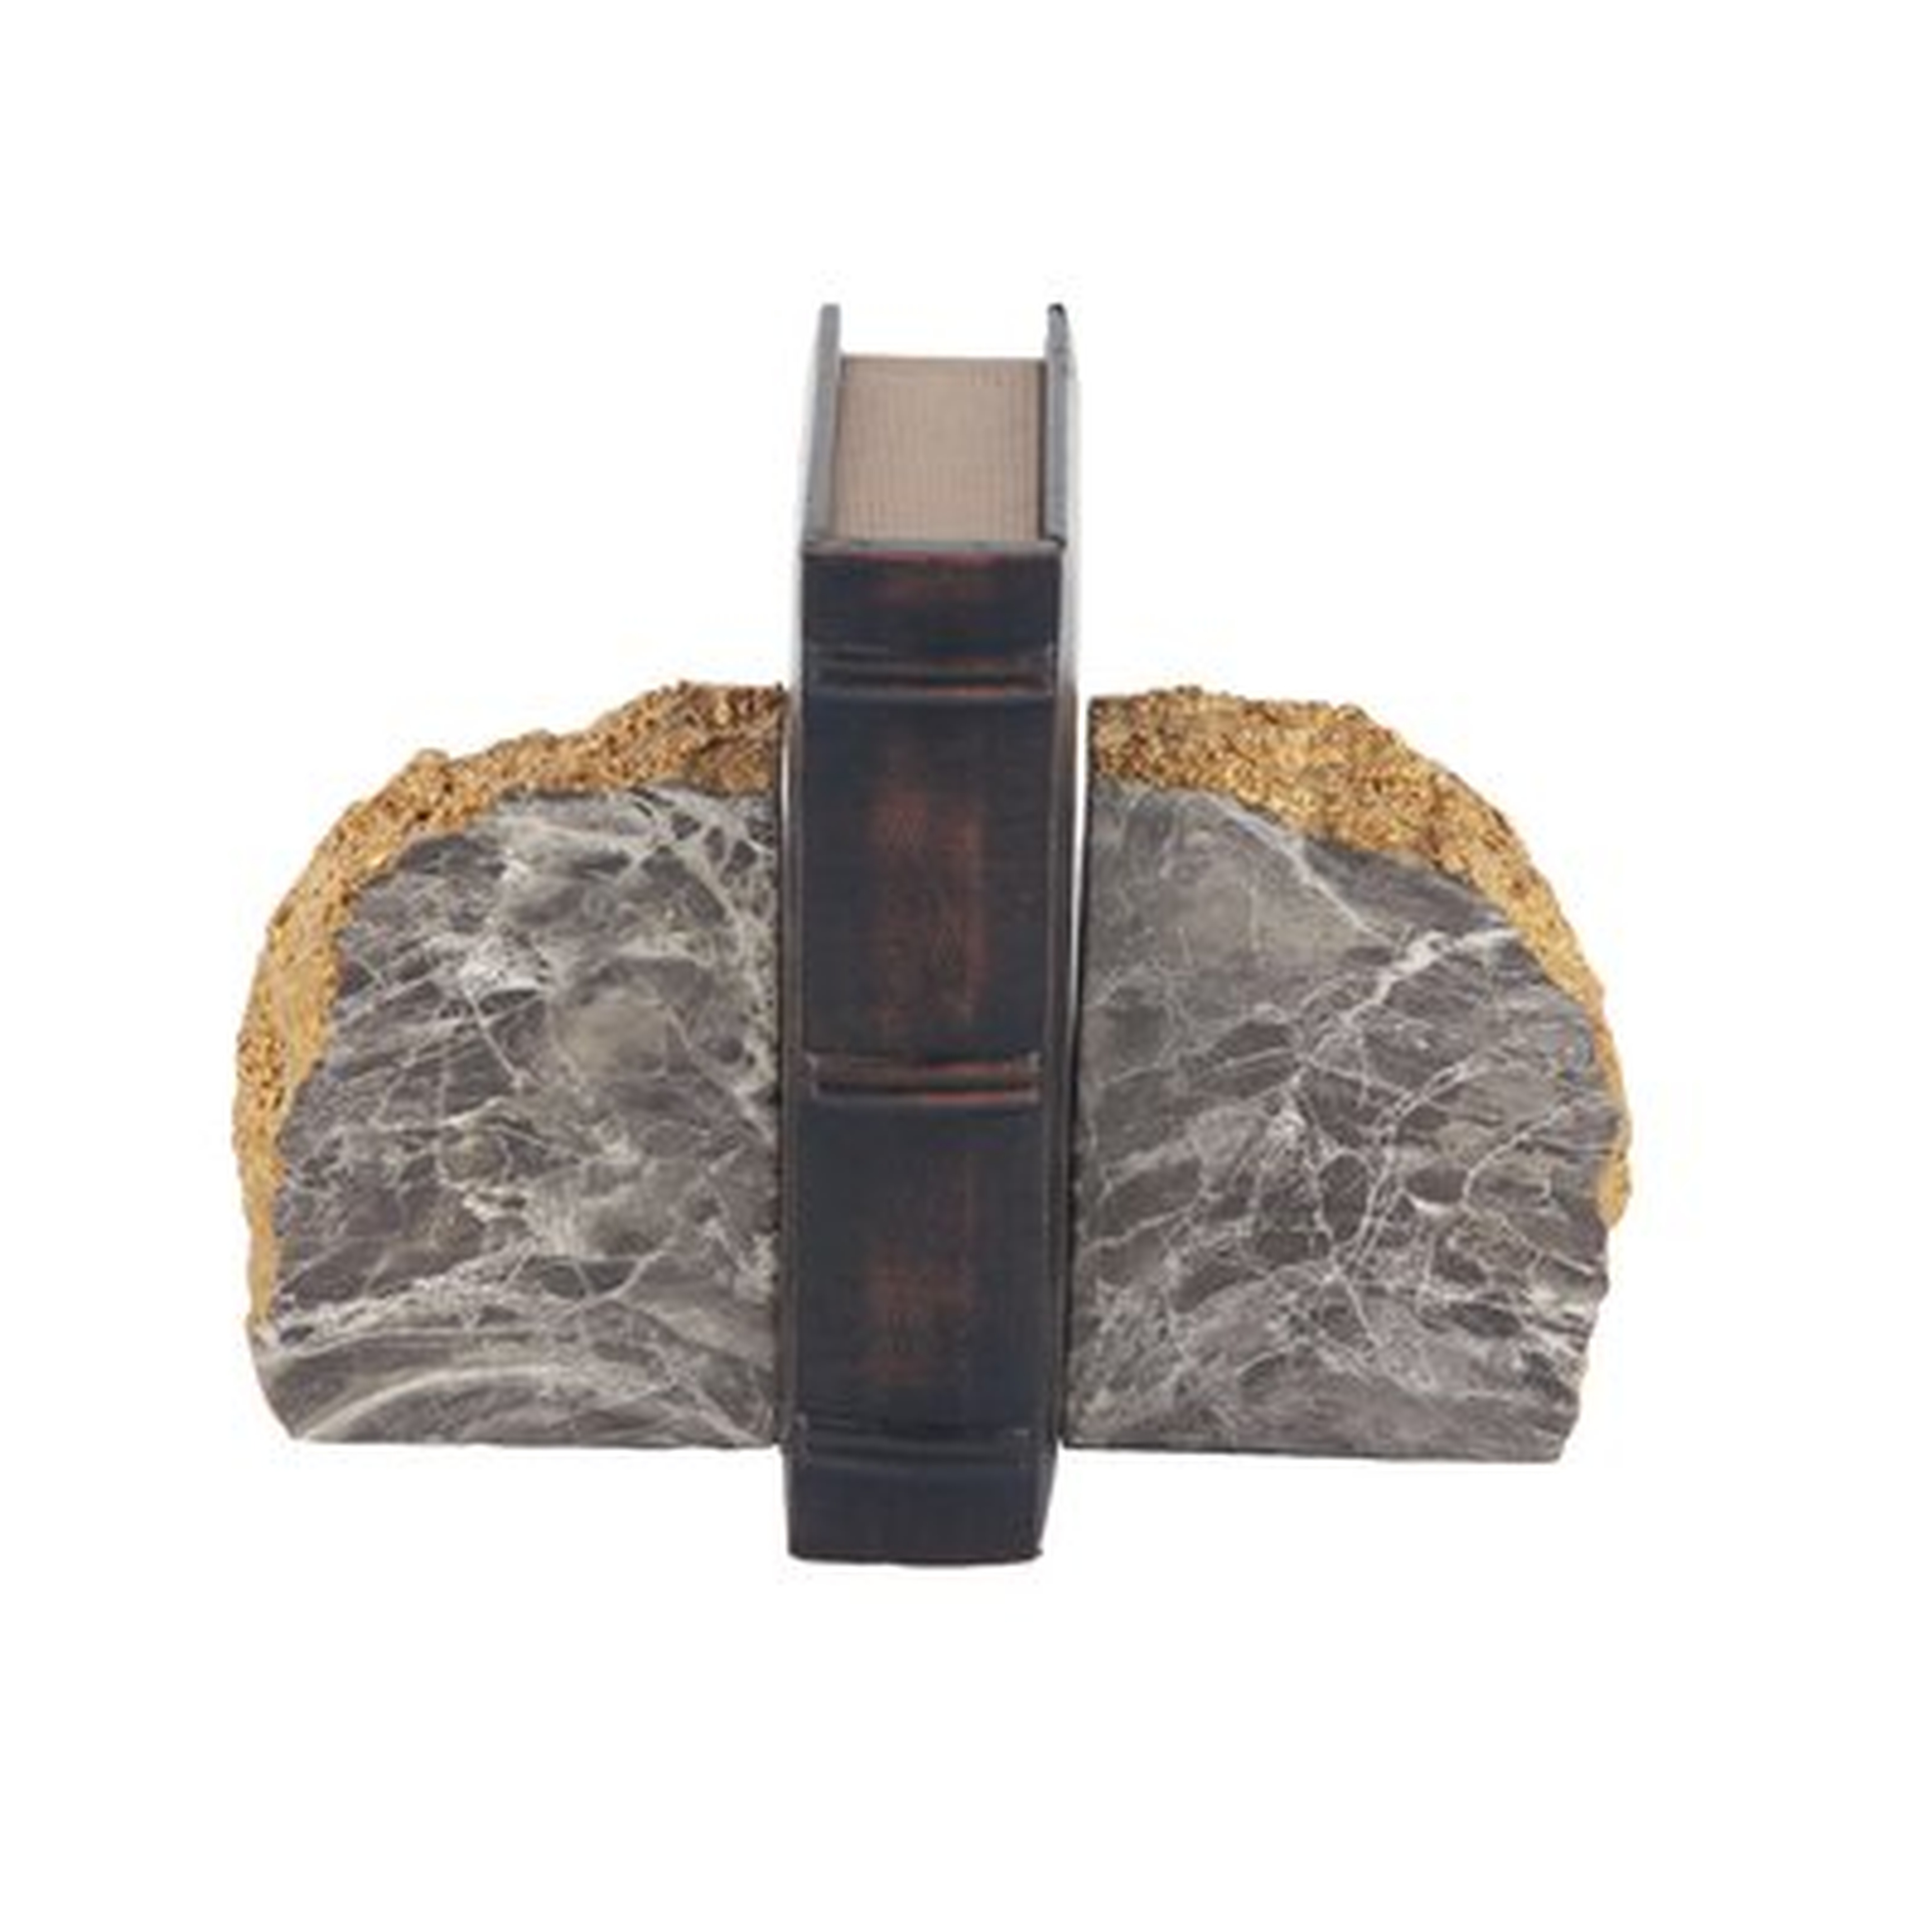 Rustic Domed Rock Bookends - Birch Lane